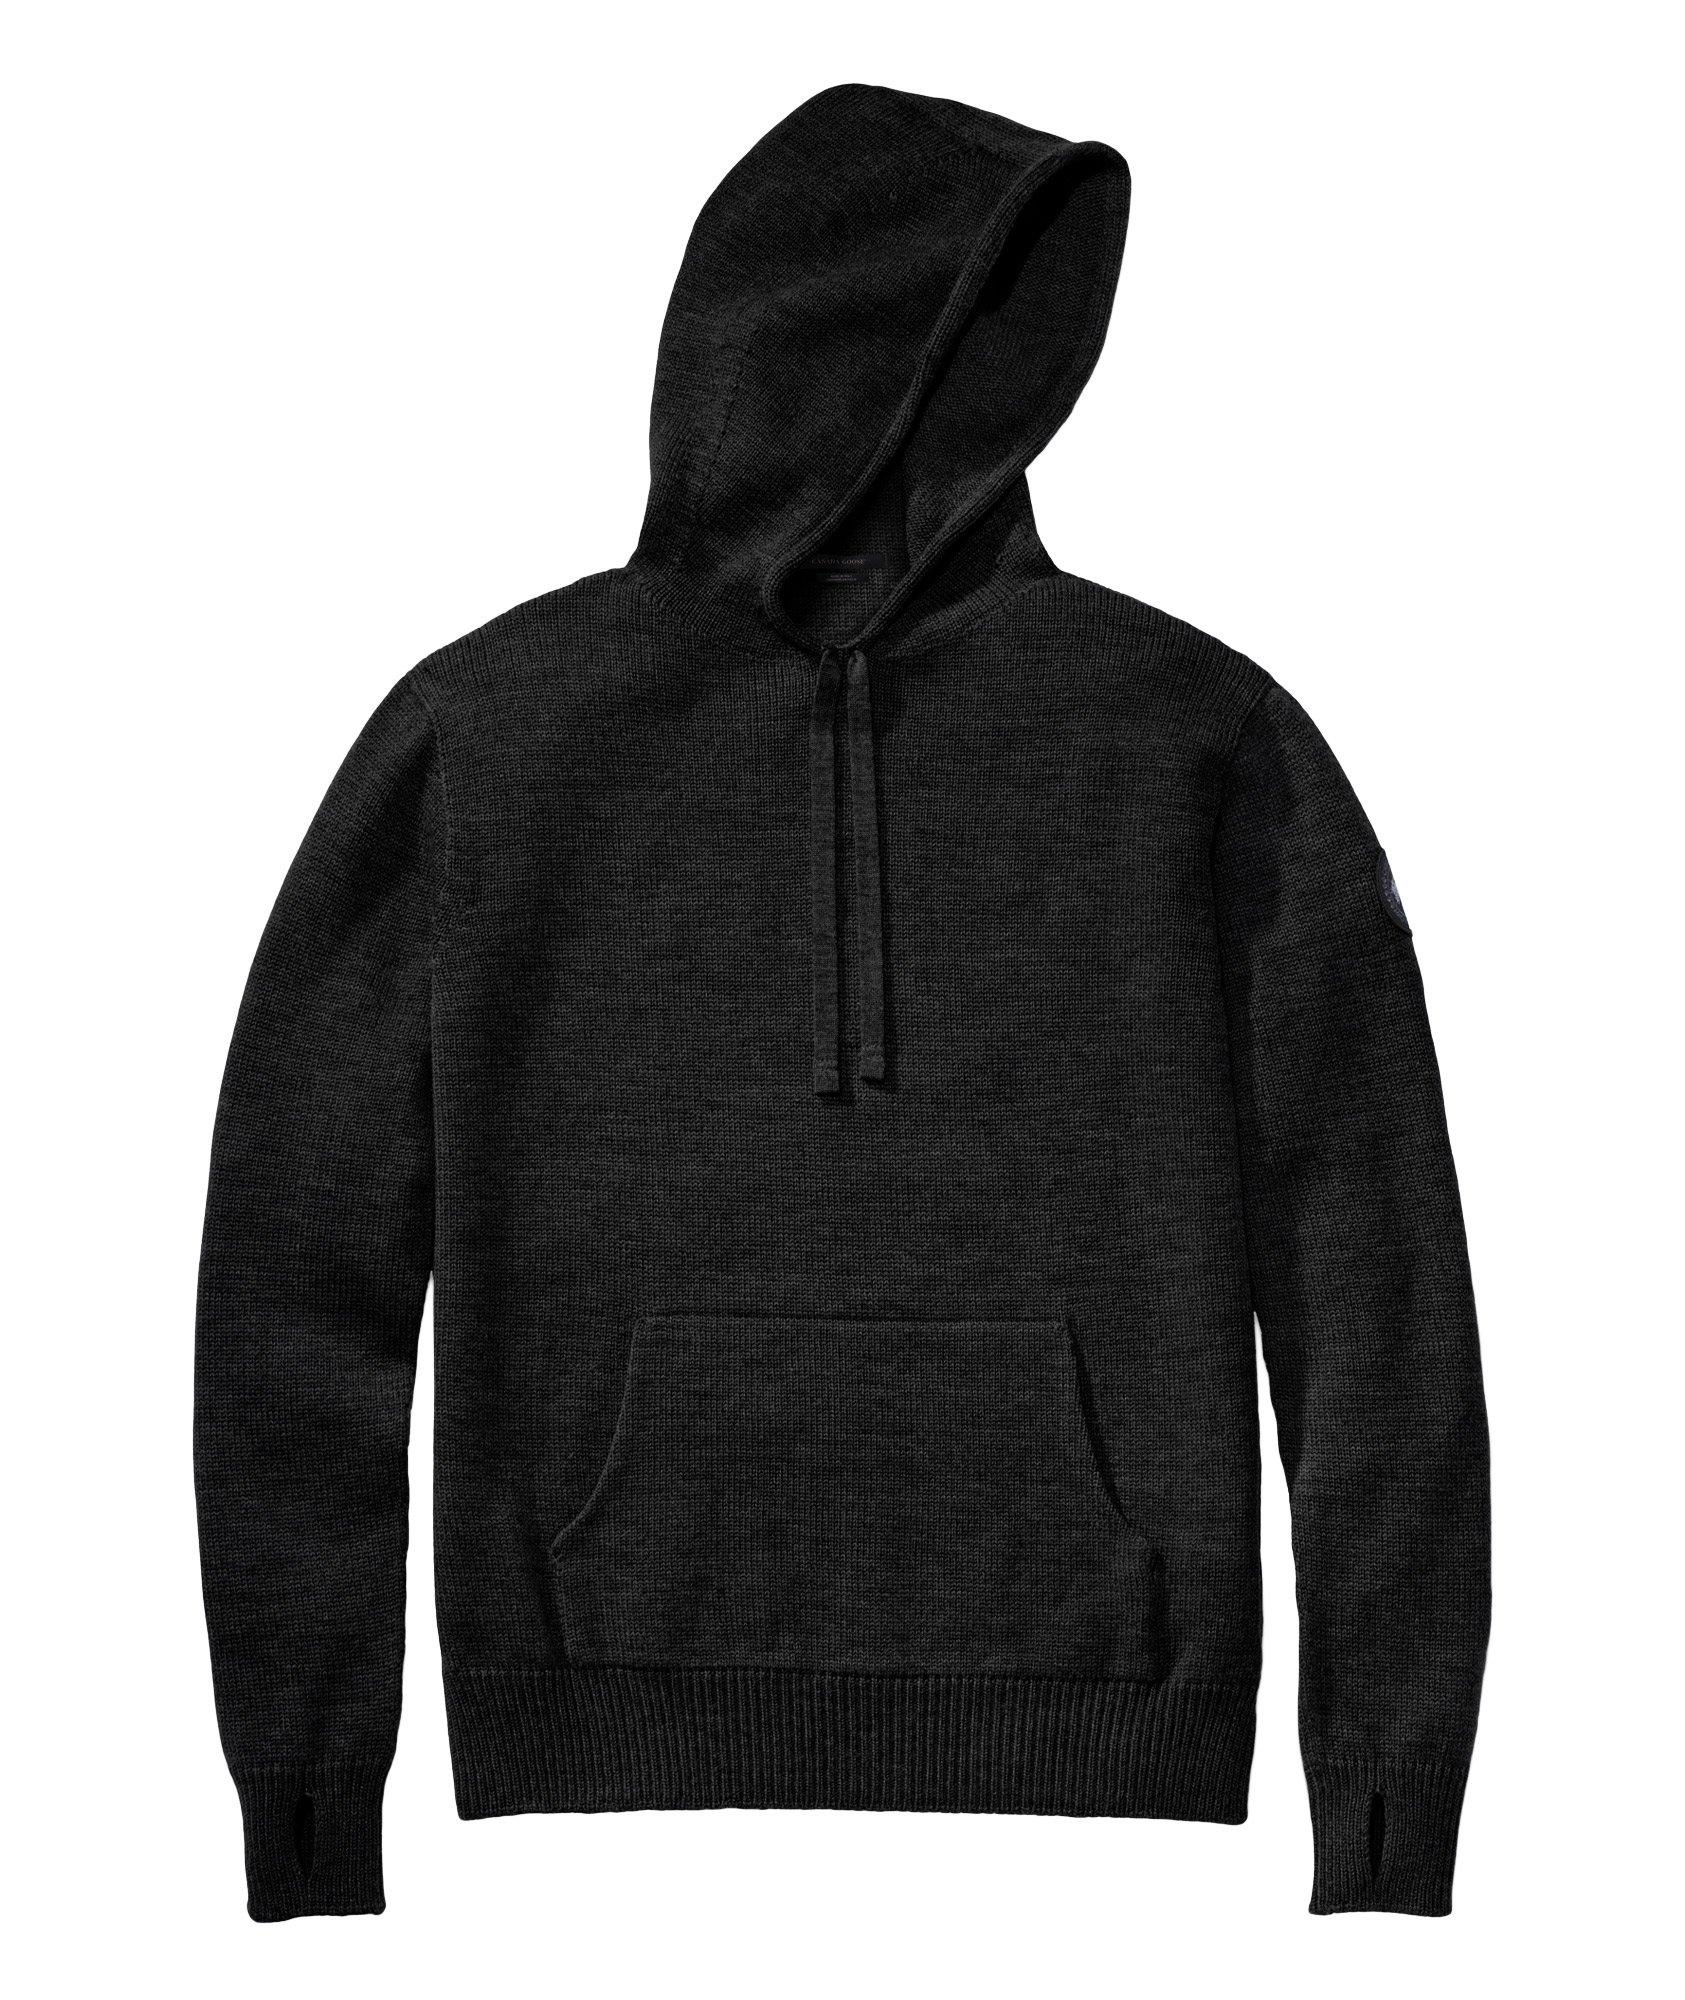 Vancouver Knit Hoodie image 0